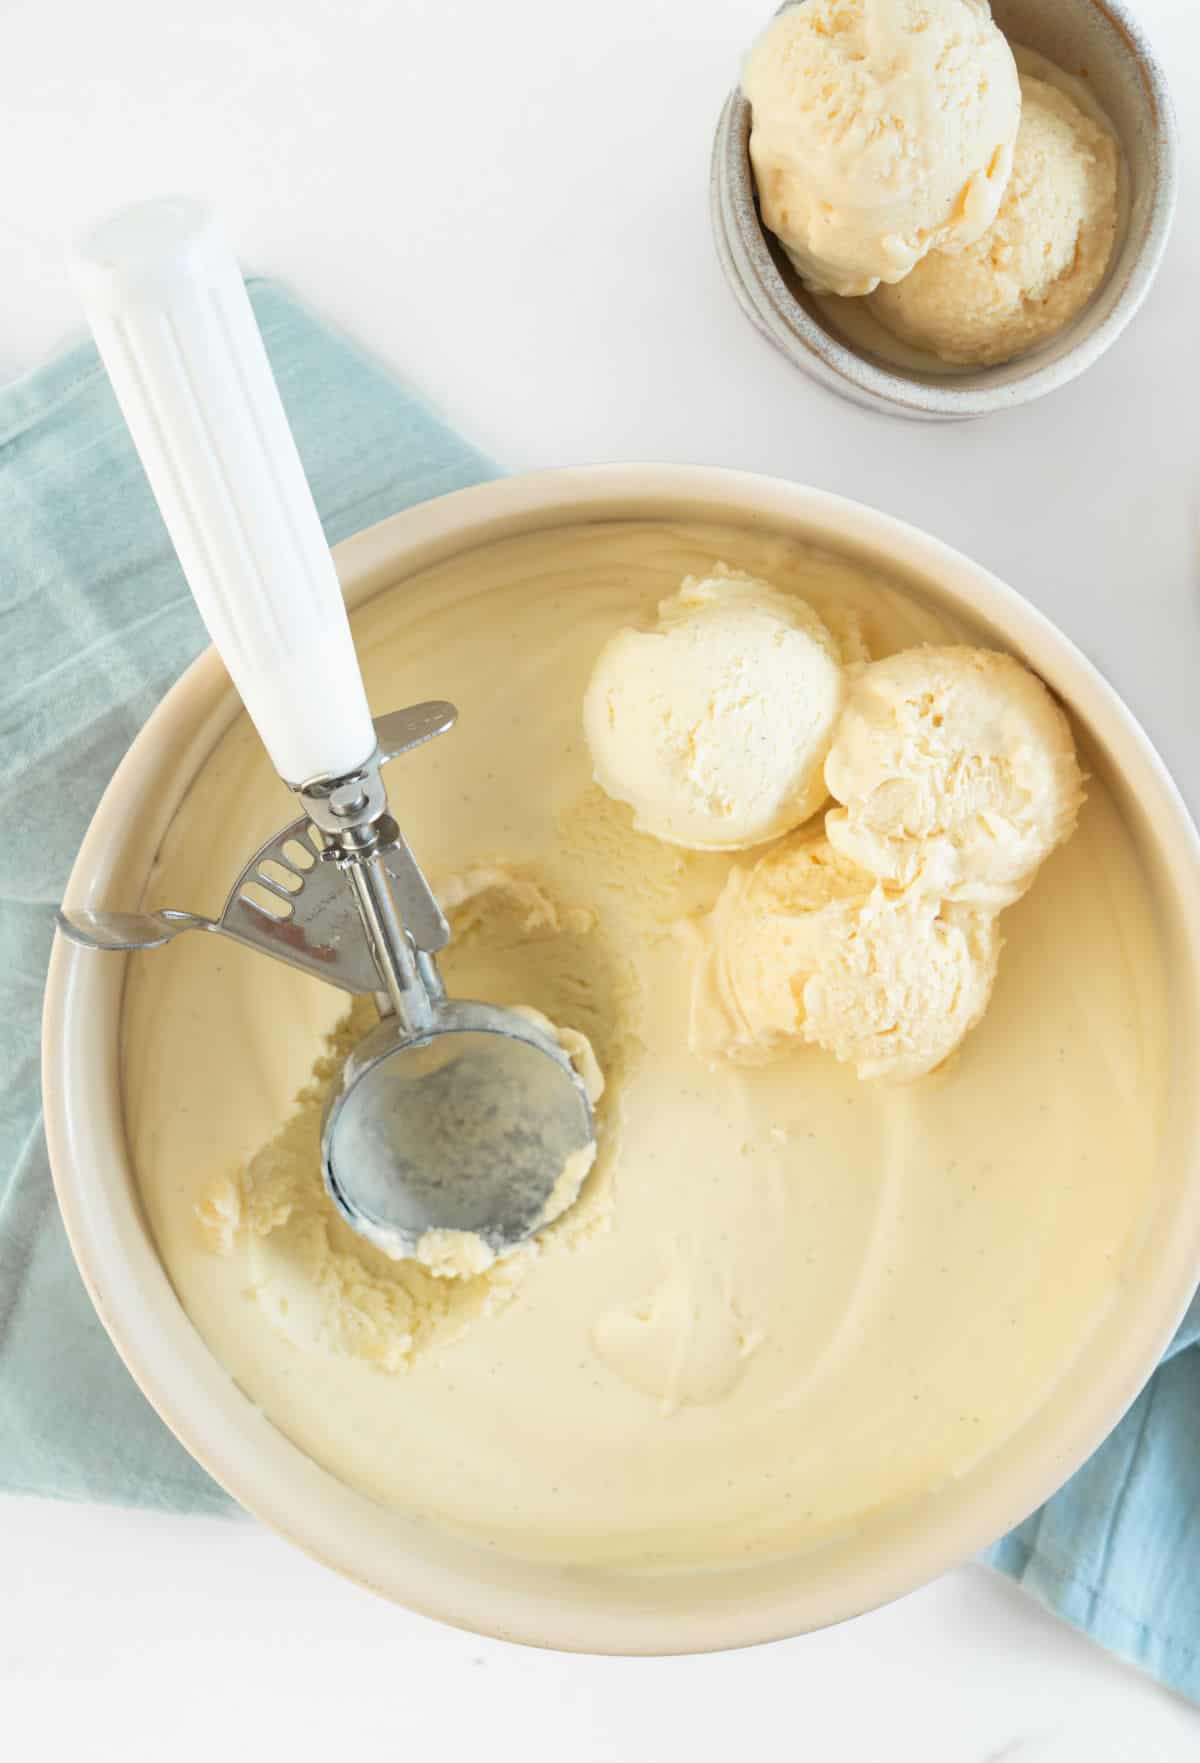 Round metal beige pan with vanilla ice cream. Scoops with white serving spoon. Light blue cloth on a white surface. 